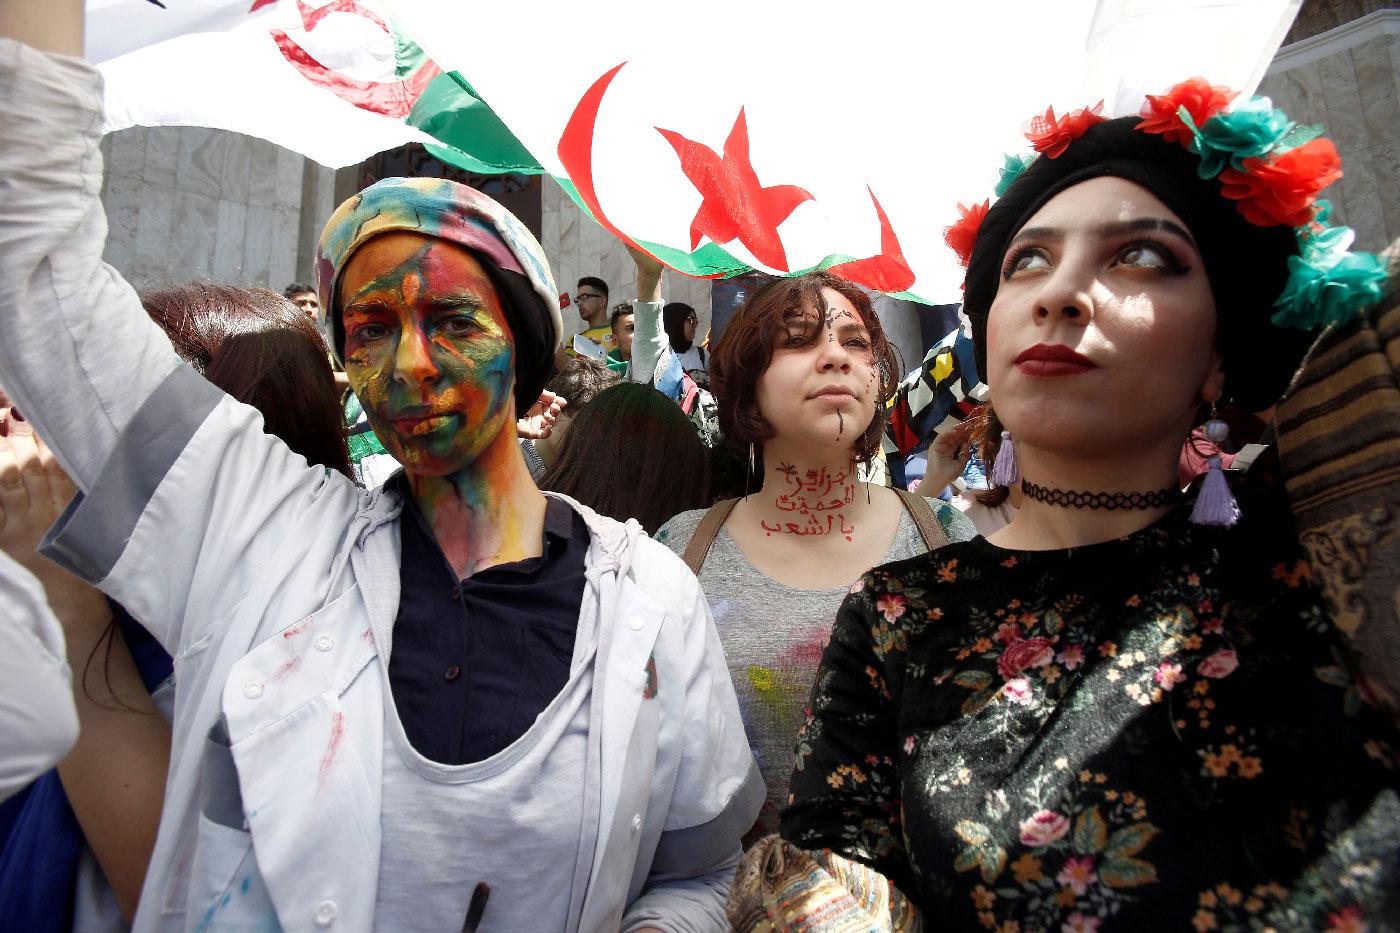 Demonstrators with painted faces hold flags during anti government protests in Algiers